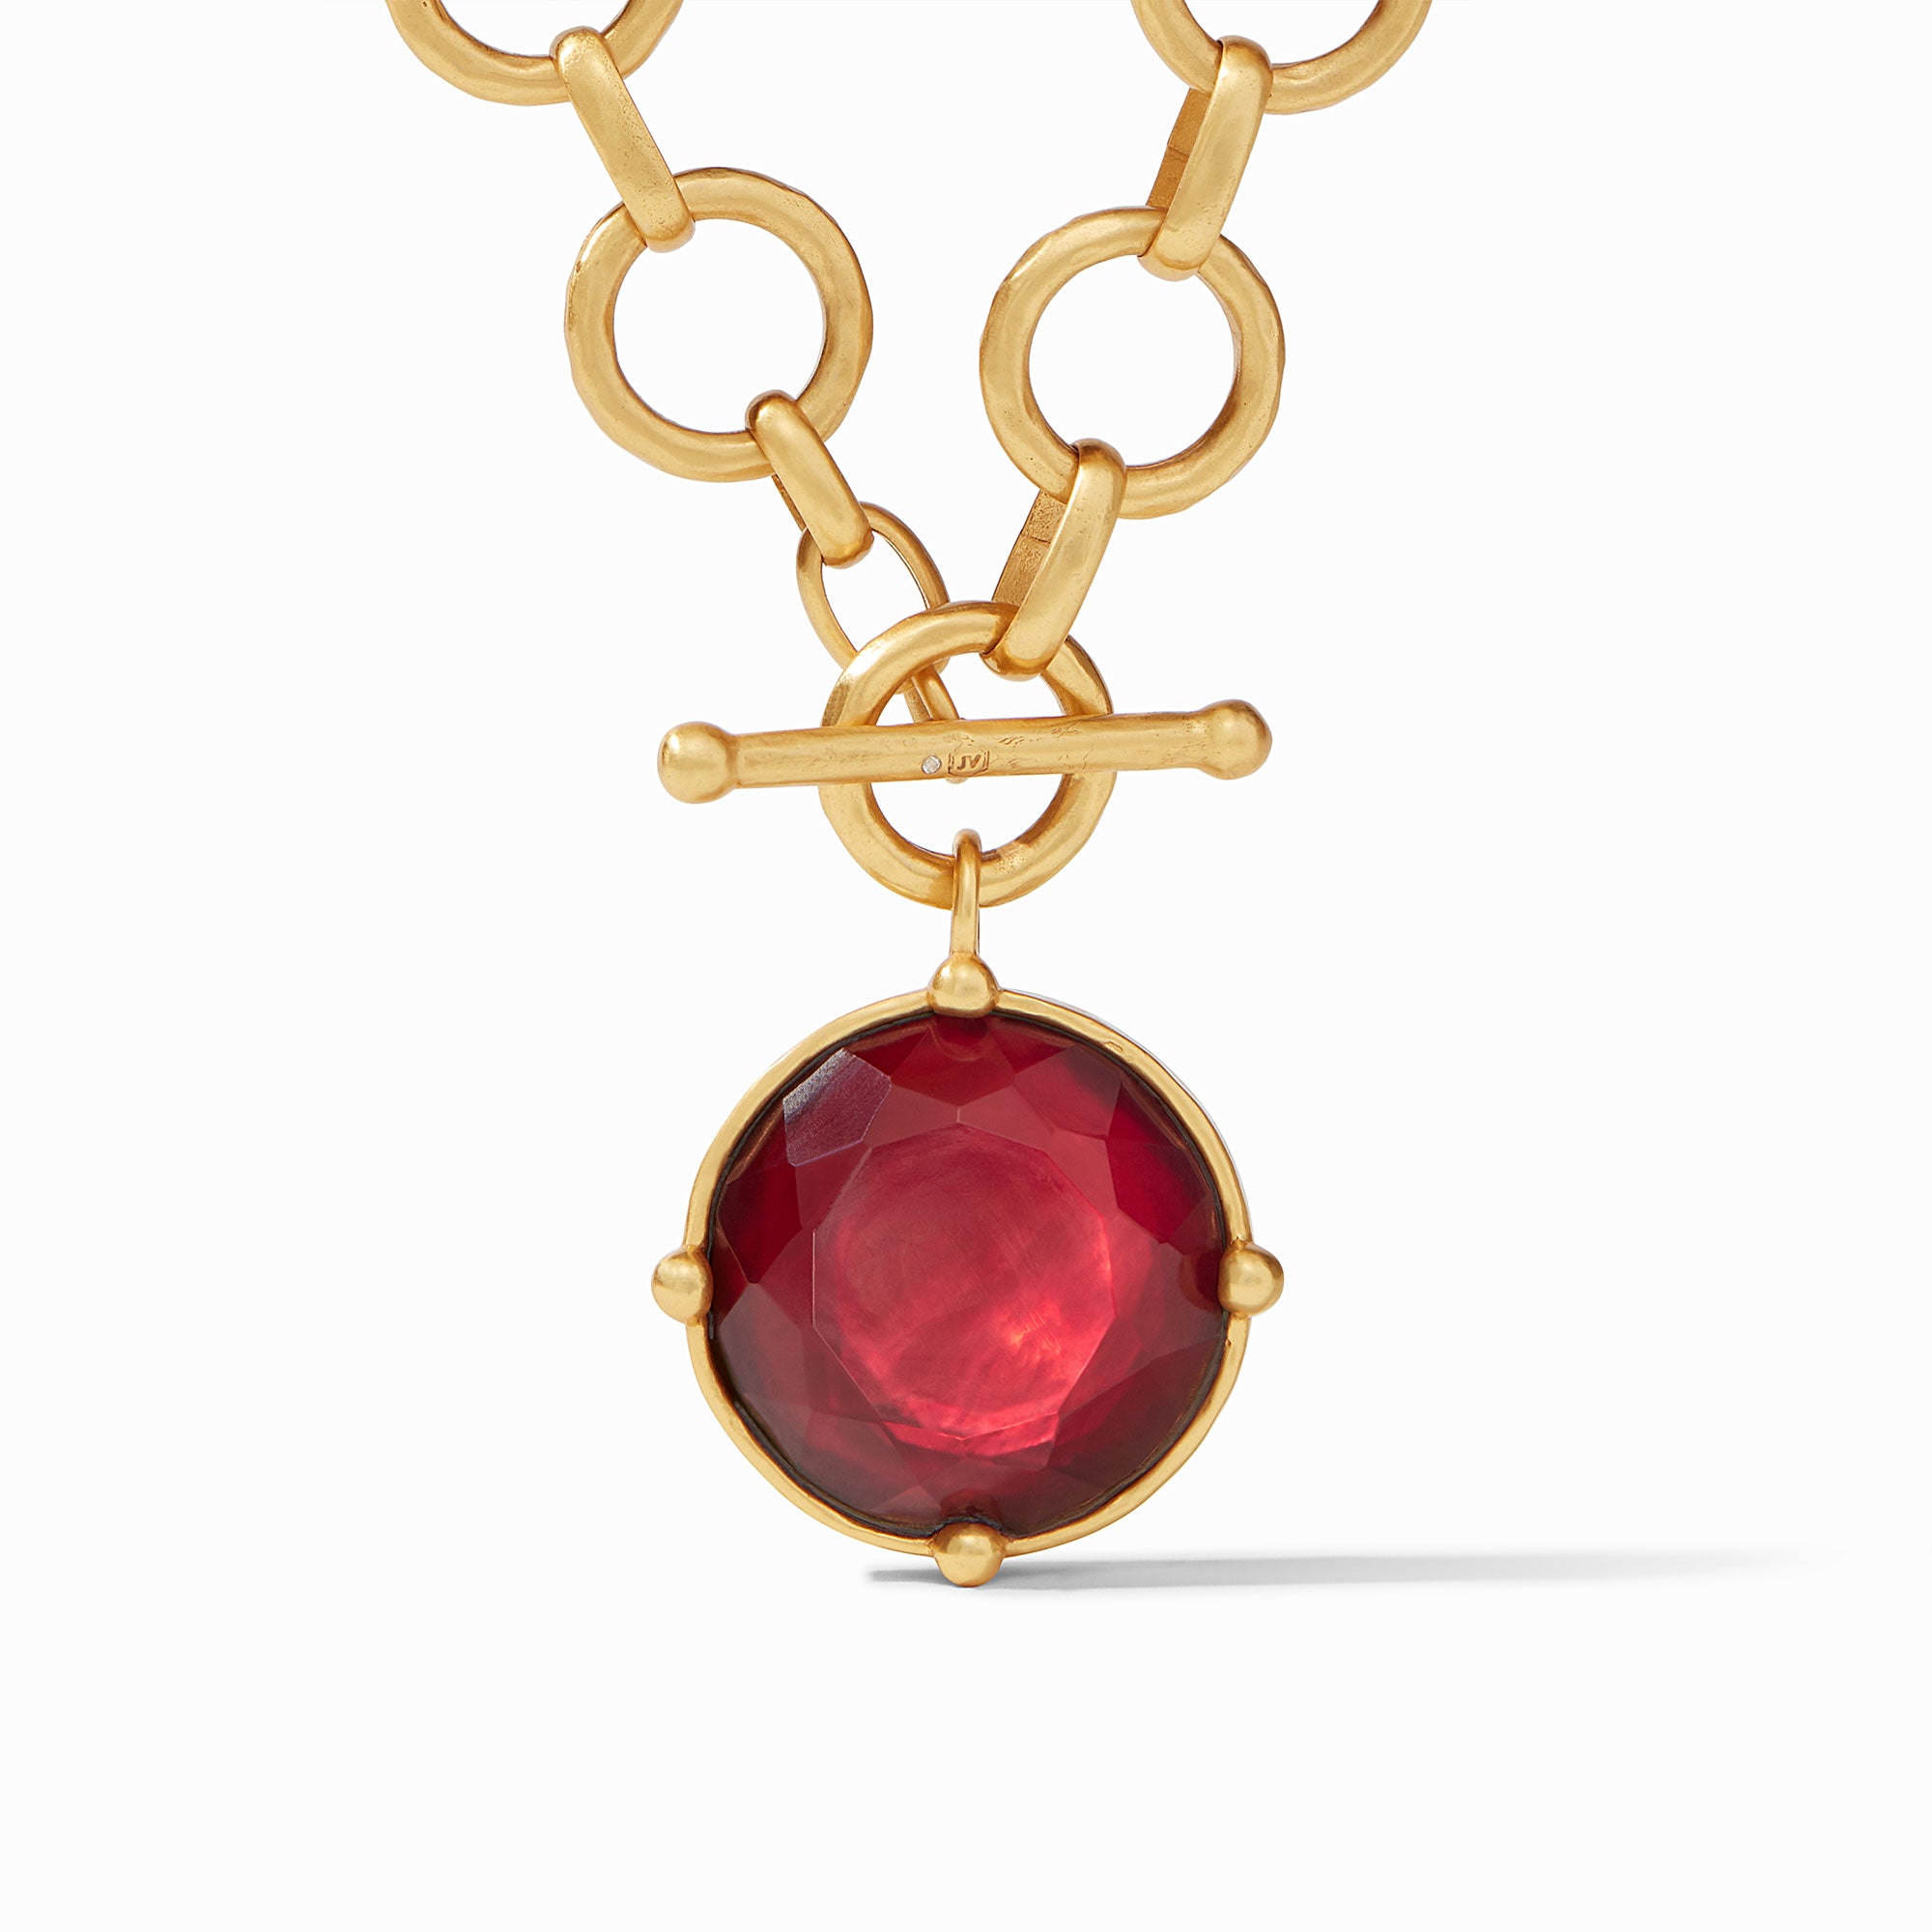 Handmade Topaz Ruby Necklace With Earrings - Gleam Jewels